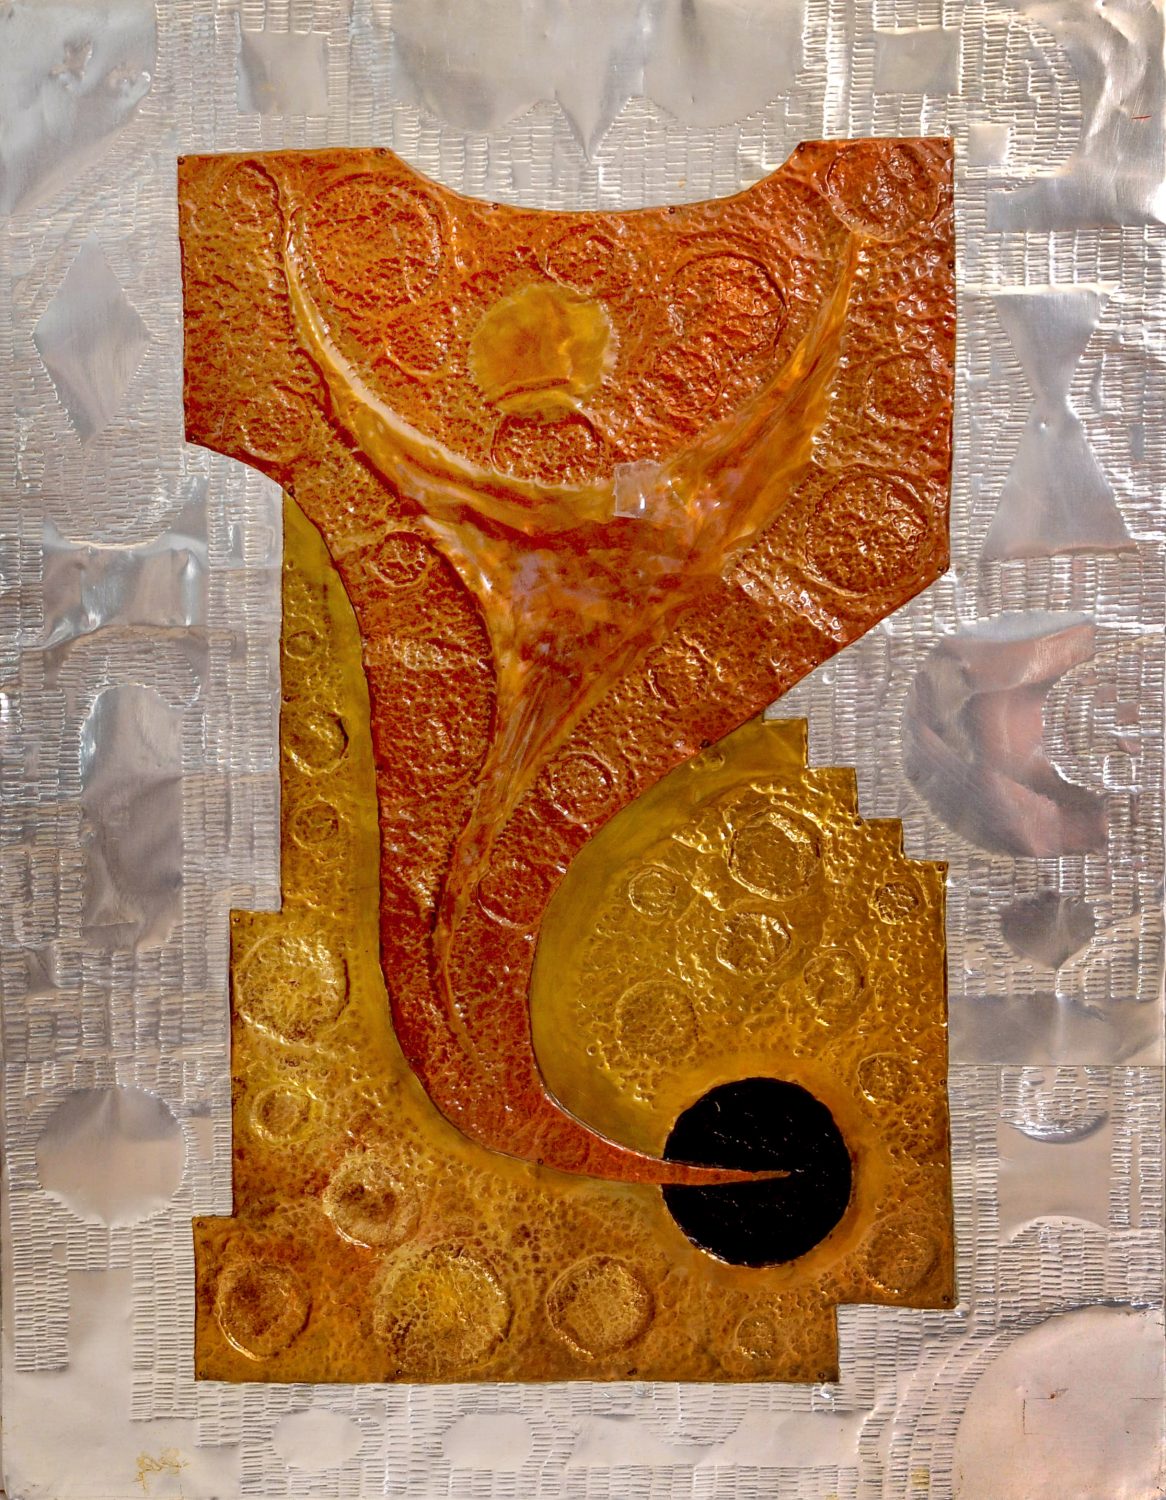 thumbnail of Testimony Continent Symbol Unit by Ecuadorian artist Boanerges Mideros. medium: embossing metal. Dimensions: 31.5 x 24.5 inches. date: unknown